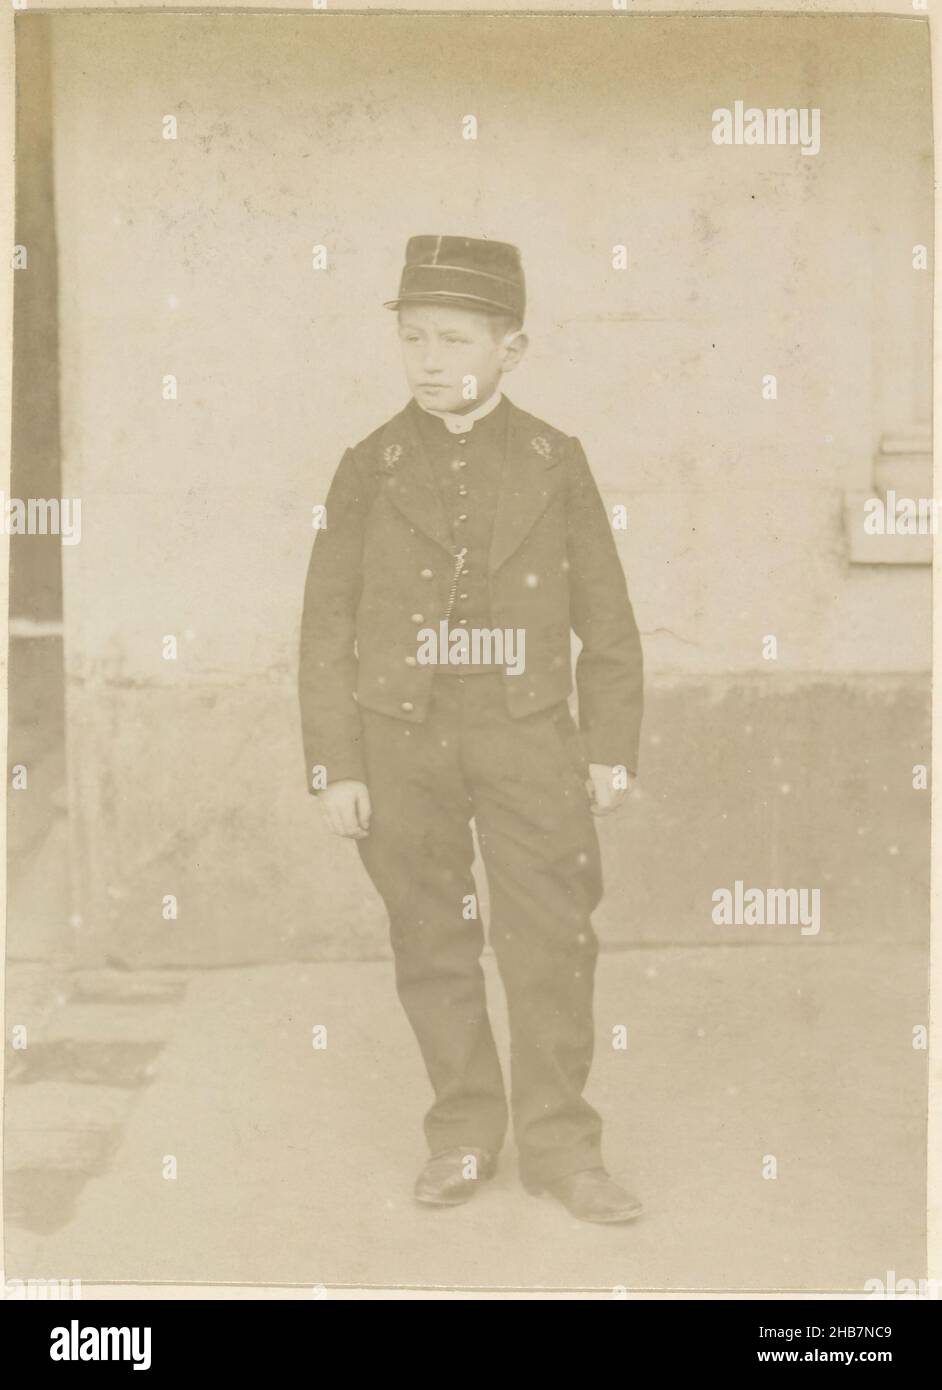 Portrait of a French boy in a uniform, Part of Photo Album of a French amateur photographer with shots of a family, distillery Delizy &amp; Doistau Fils, the army and places of interest in France., anonymous, France, c. 1900 - c. 1910, paper, albumen print, height 162 mm × width 113 mm Stock Photo